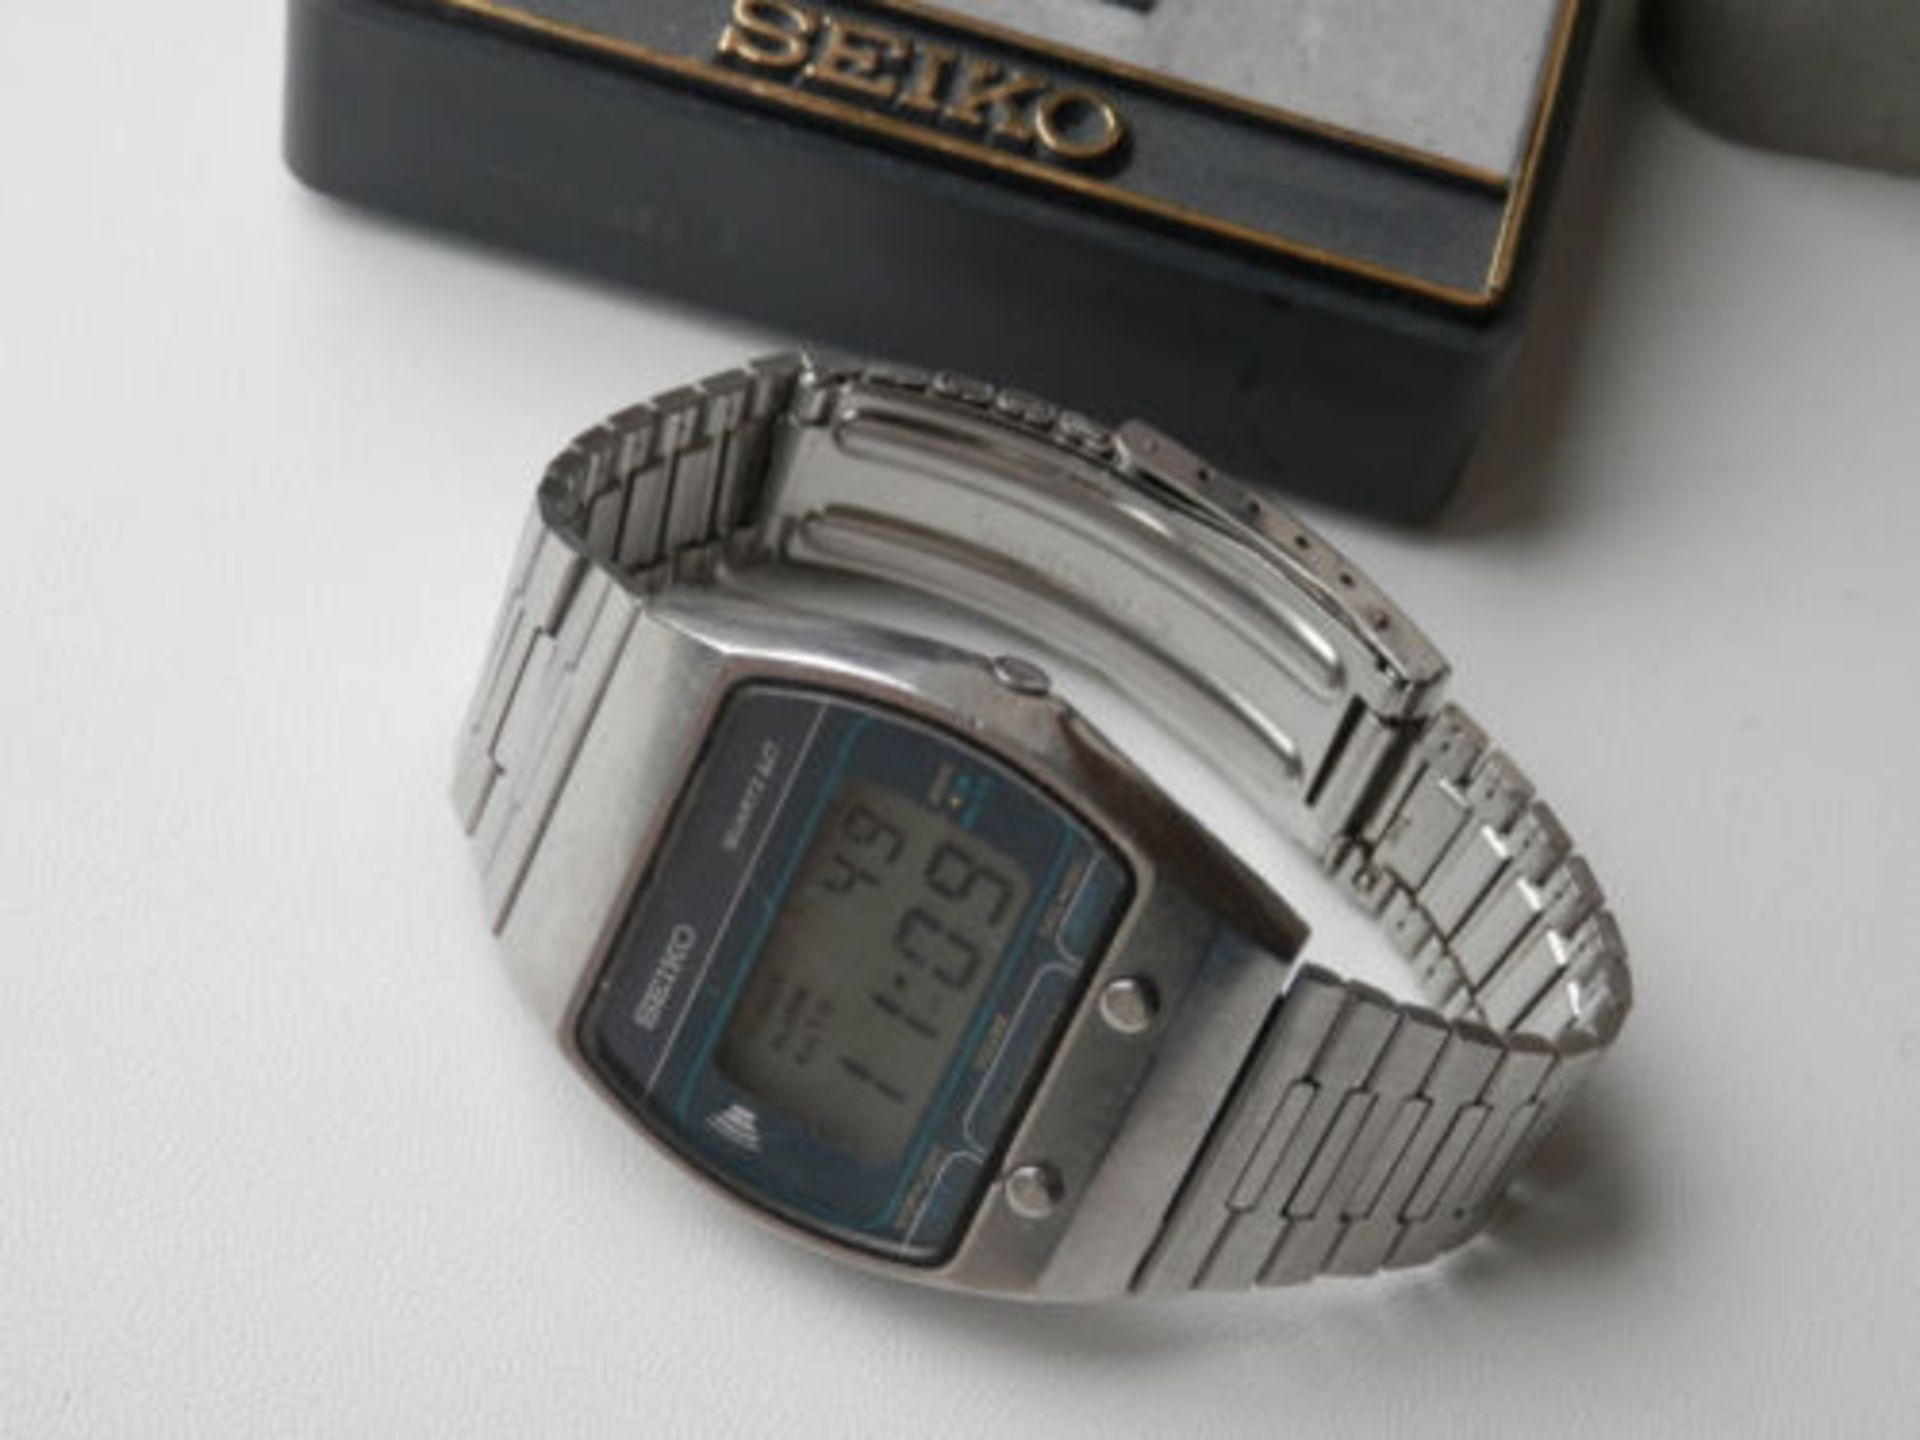 RARE 1978 SEIKO A029 5020 DIGITAL WATCH, WITH BOX, ALL WORKING - Image 7 of 12